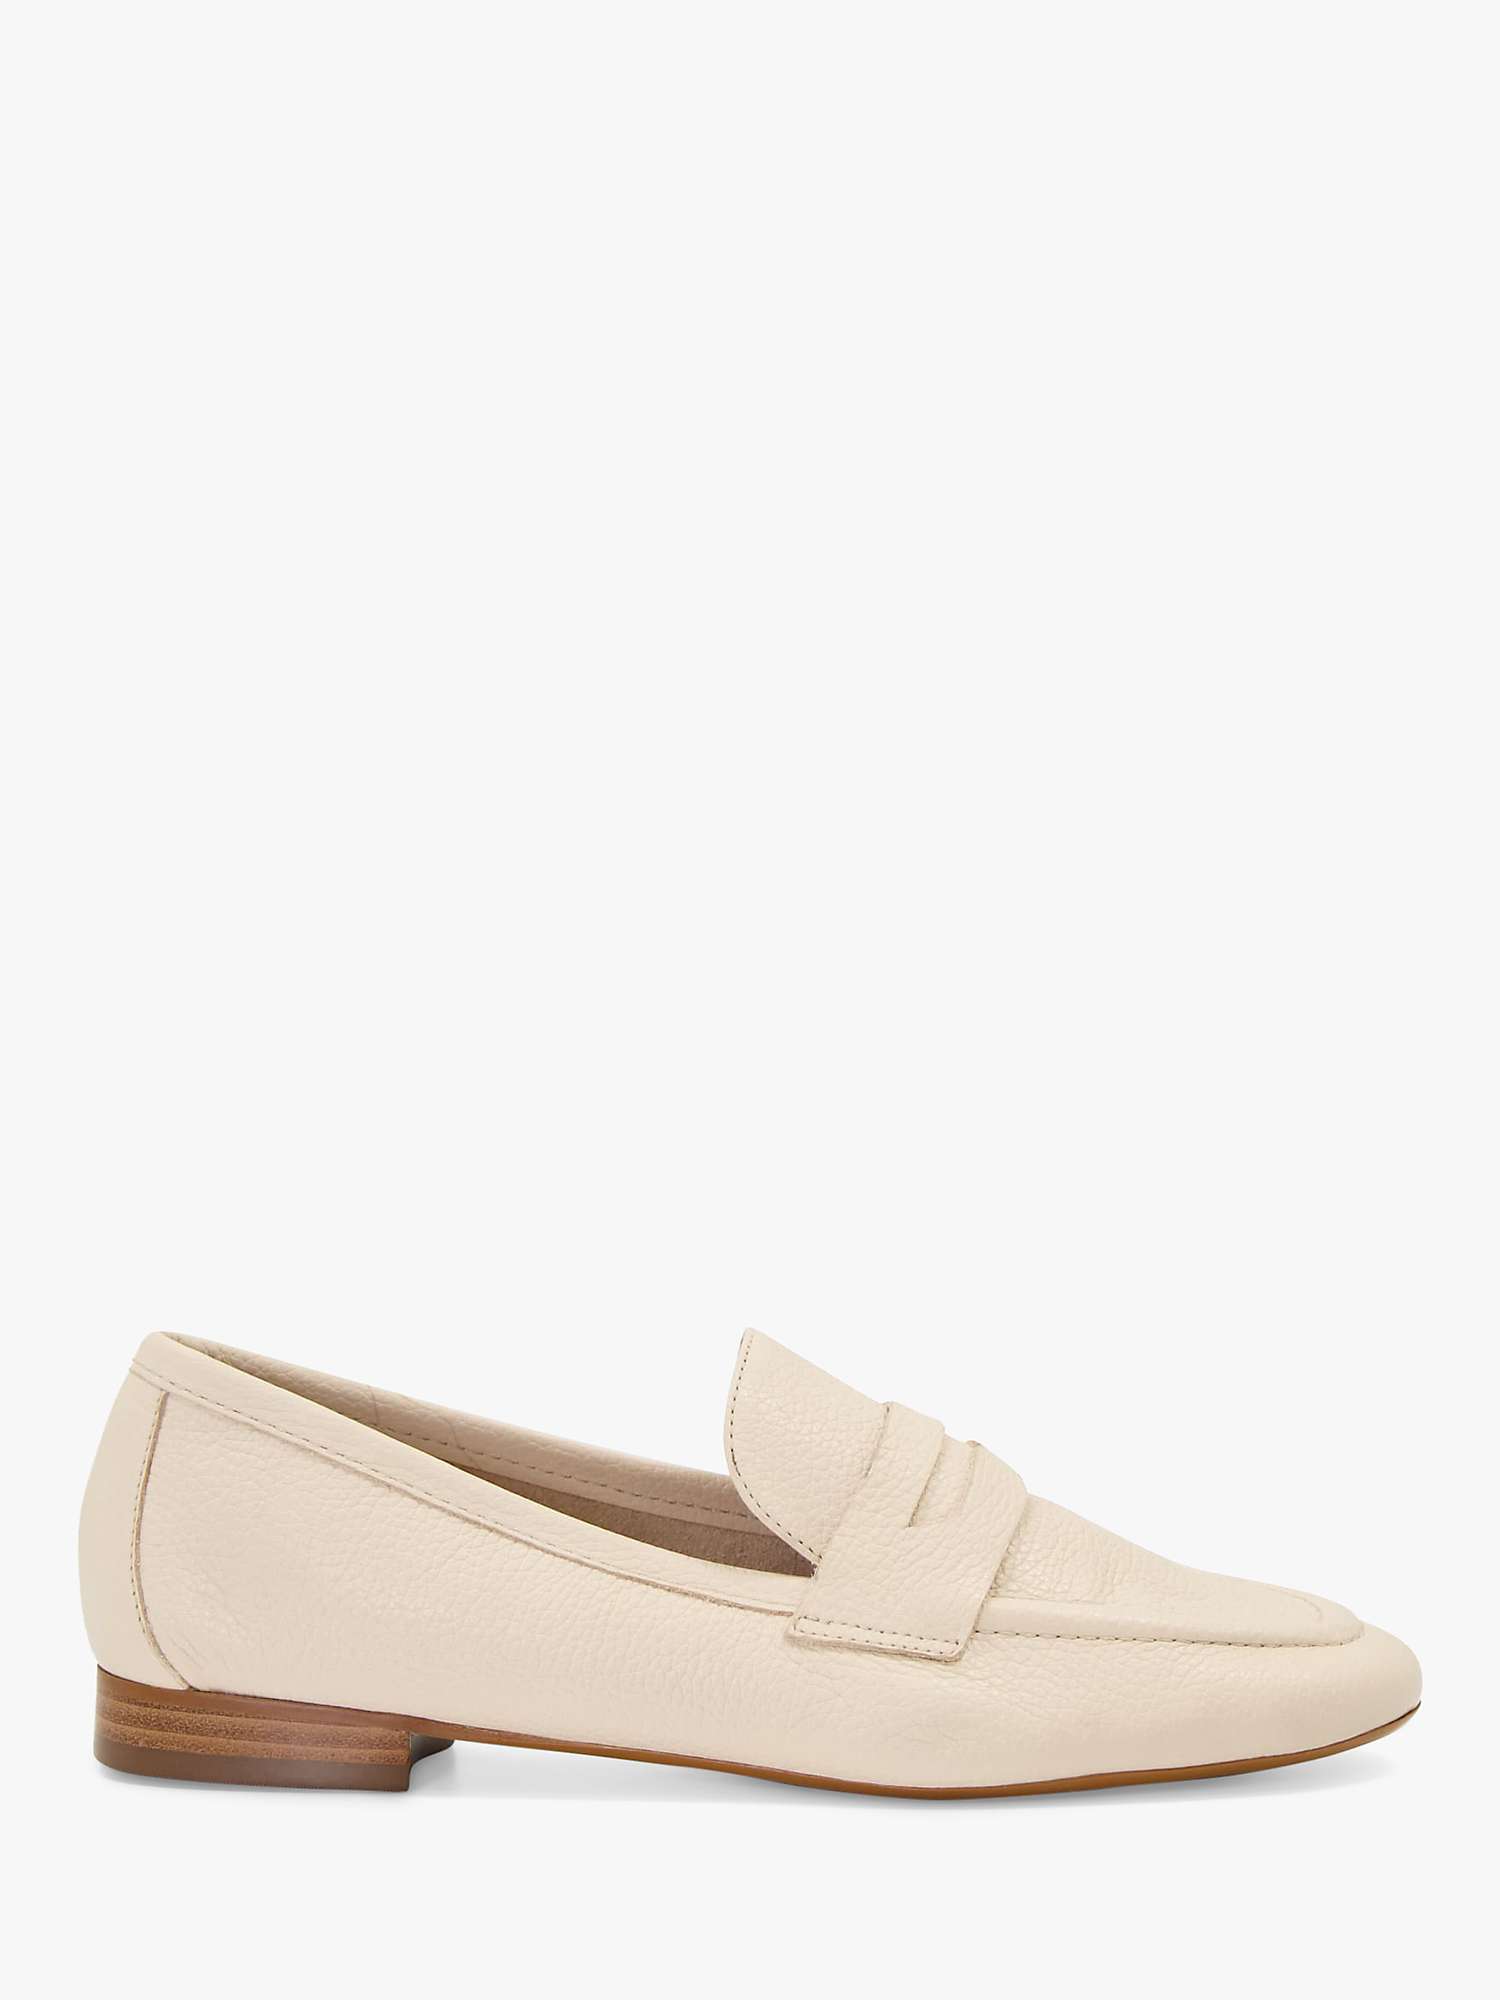 Buy Dune Gianetta Leather Flat Penny Loafers Online at johnlewis.com